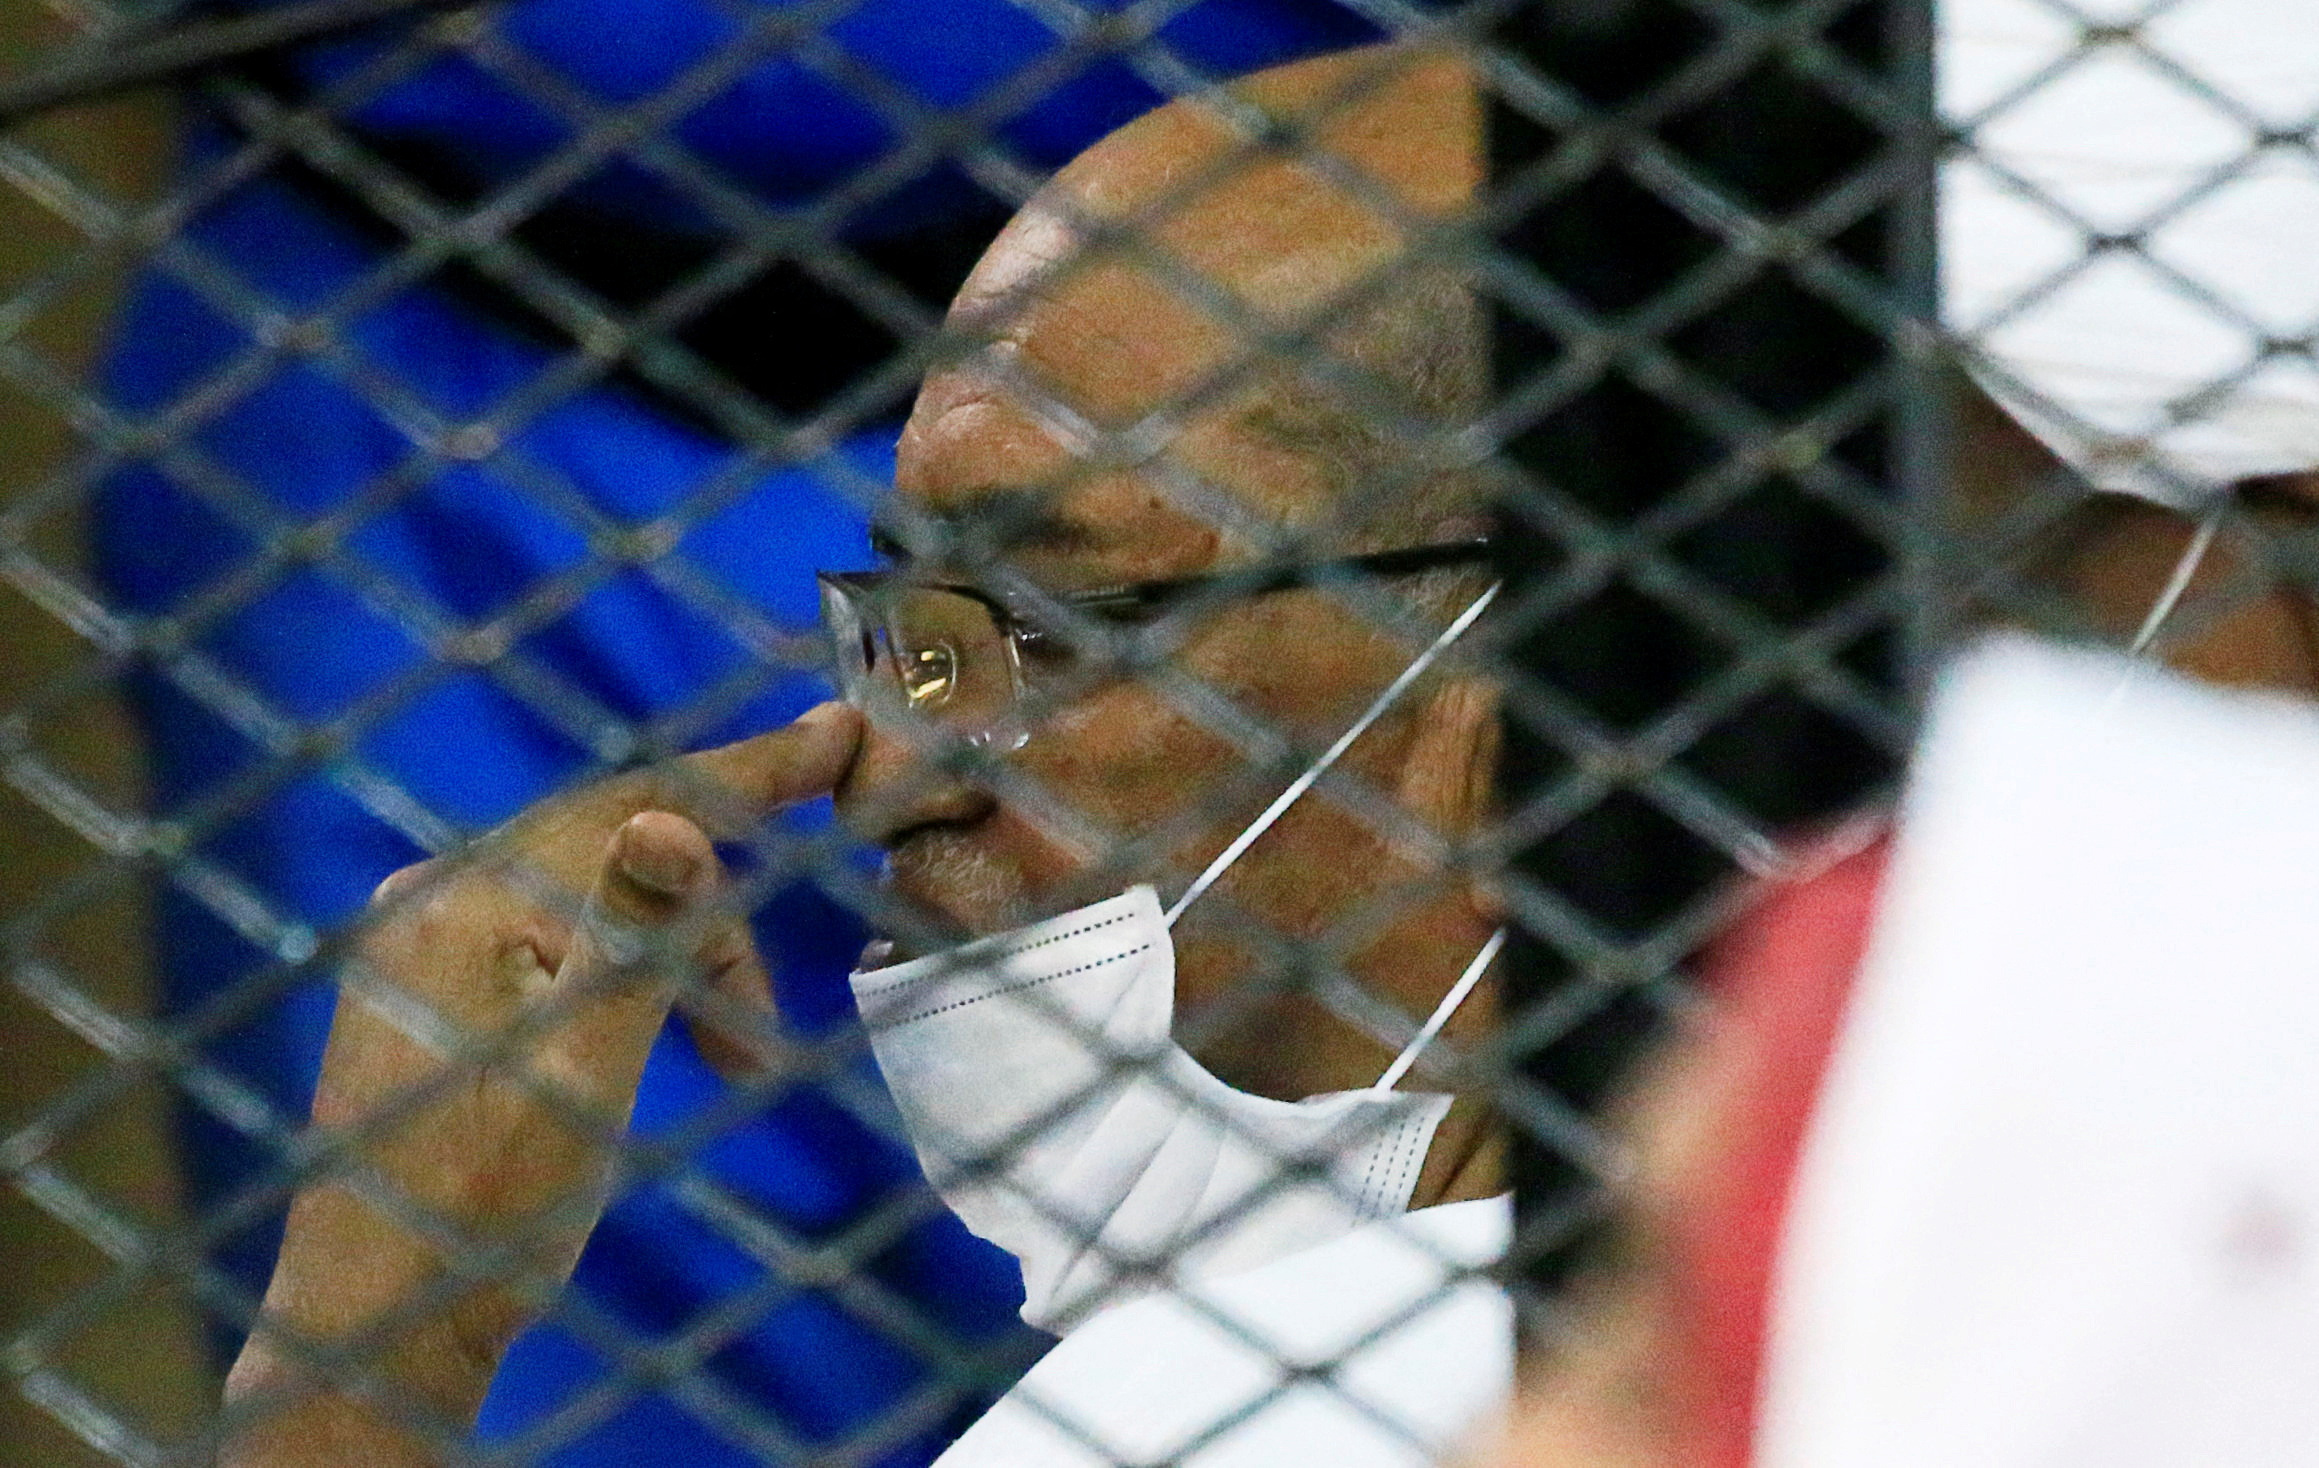 Sudan's ousted President Omar al-Bashir is seen inside the defendant's cage during his and some of his former allies trial over the 1989 military coup that brought the autocrat to power in 1989, at a courthouse in Khartoum